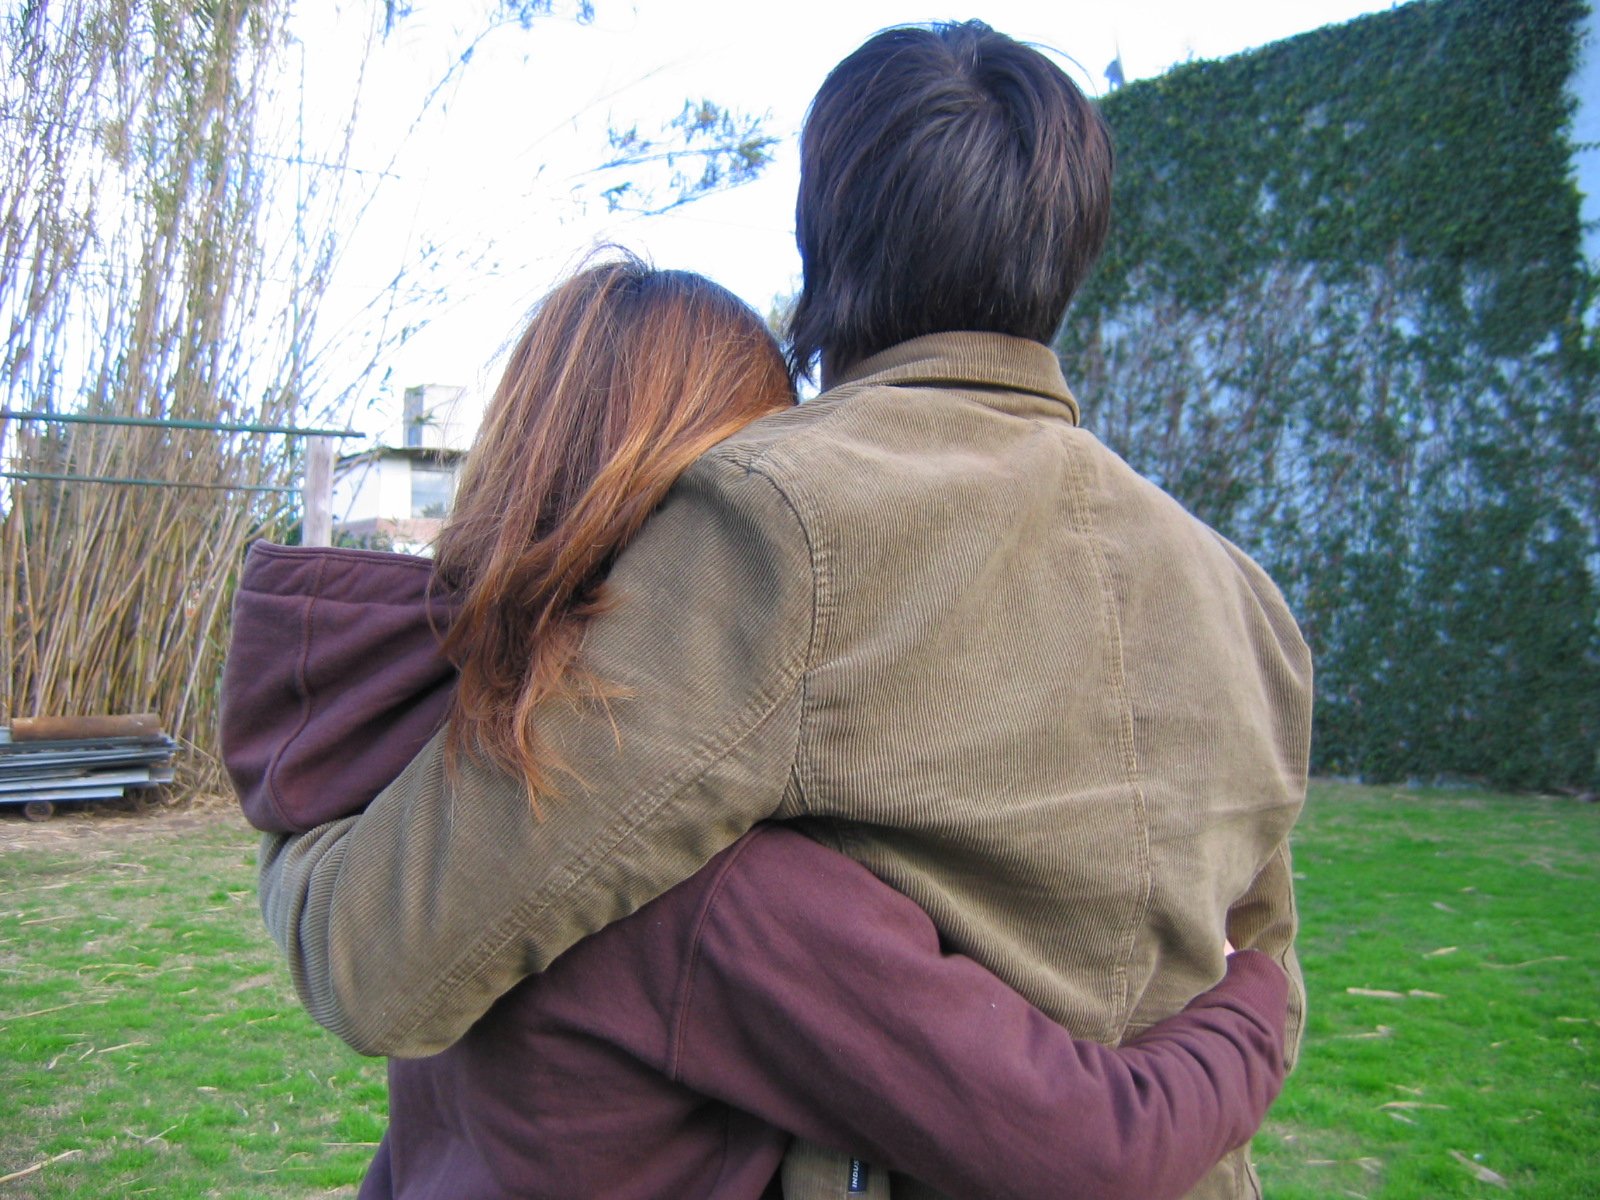 two people holding each other in their arms looking at soing